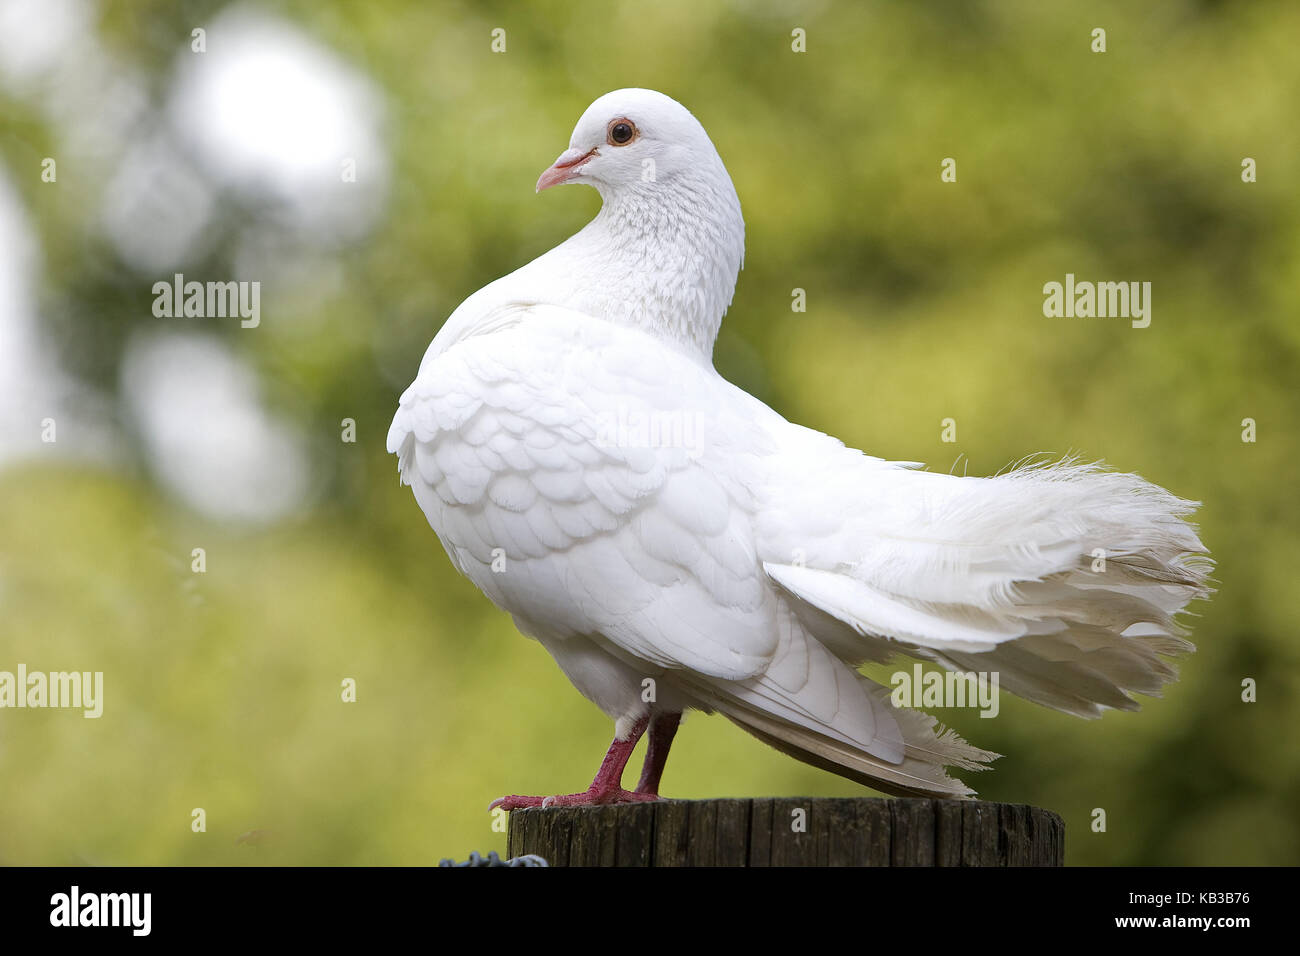 White peacock's pigeon, at the side, Stock Photo